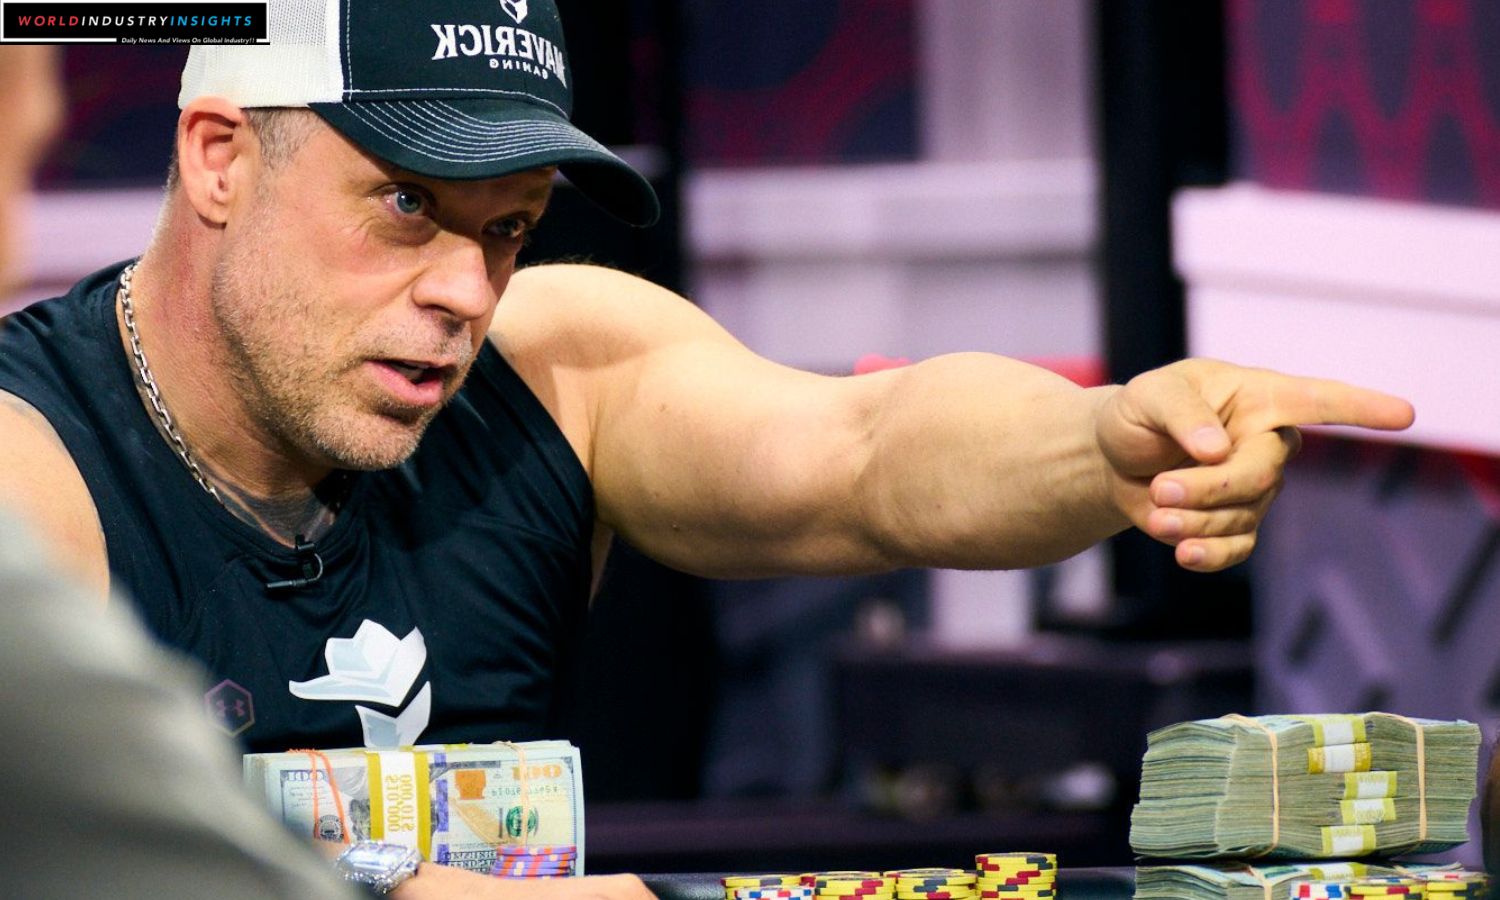 Eric Persson Poker Net Worth